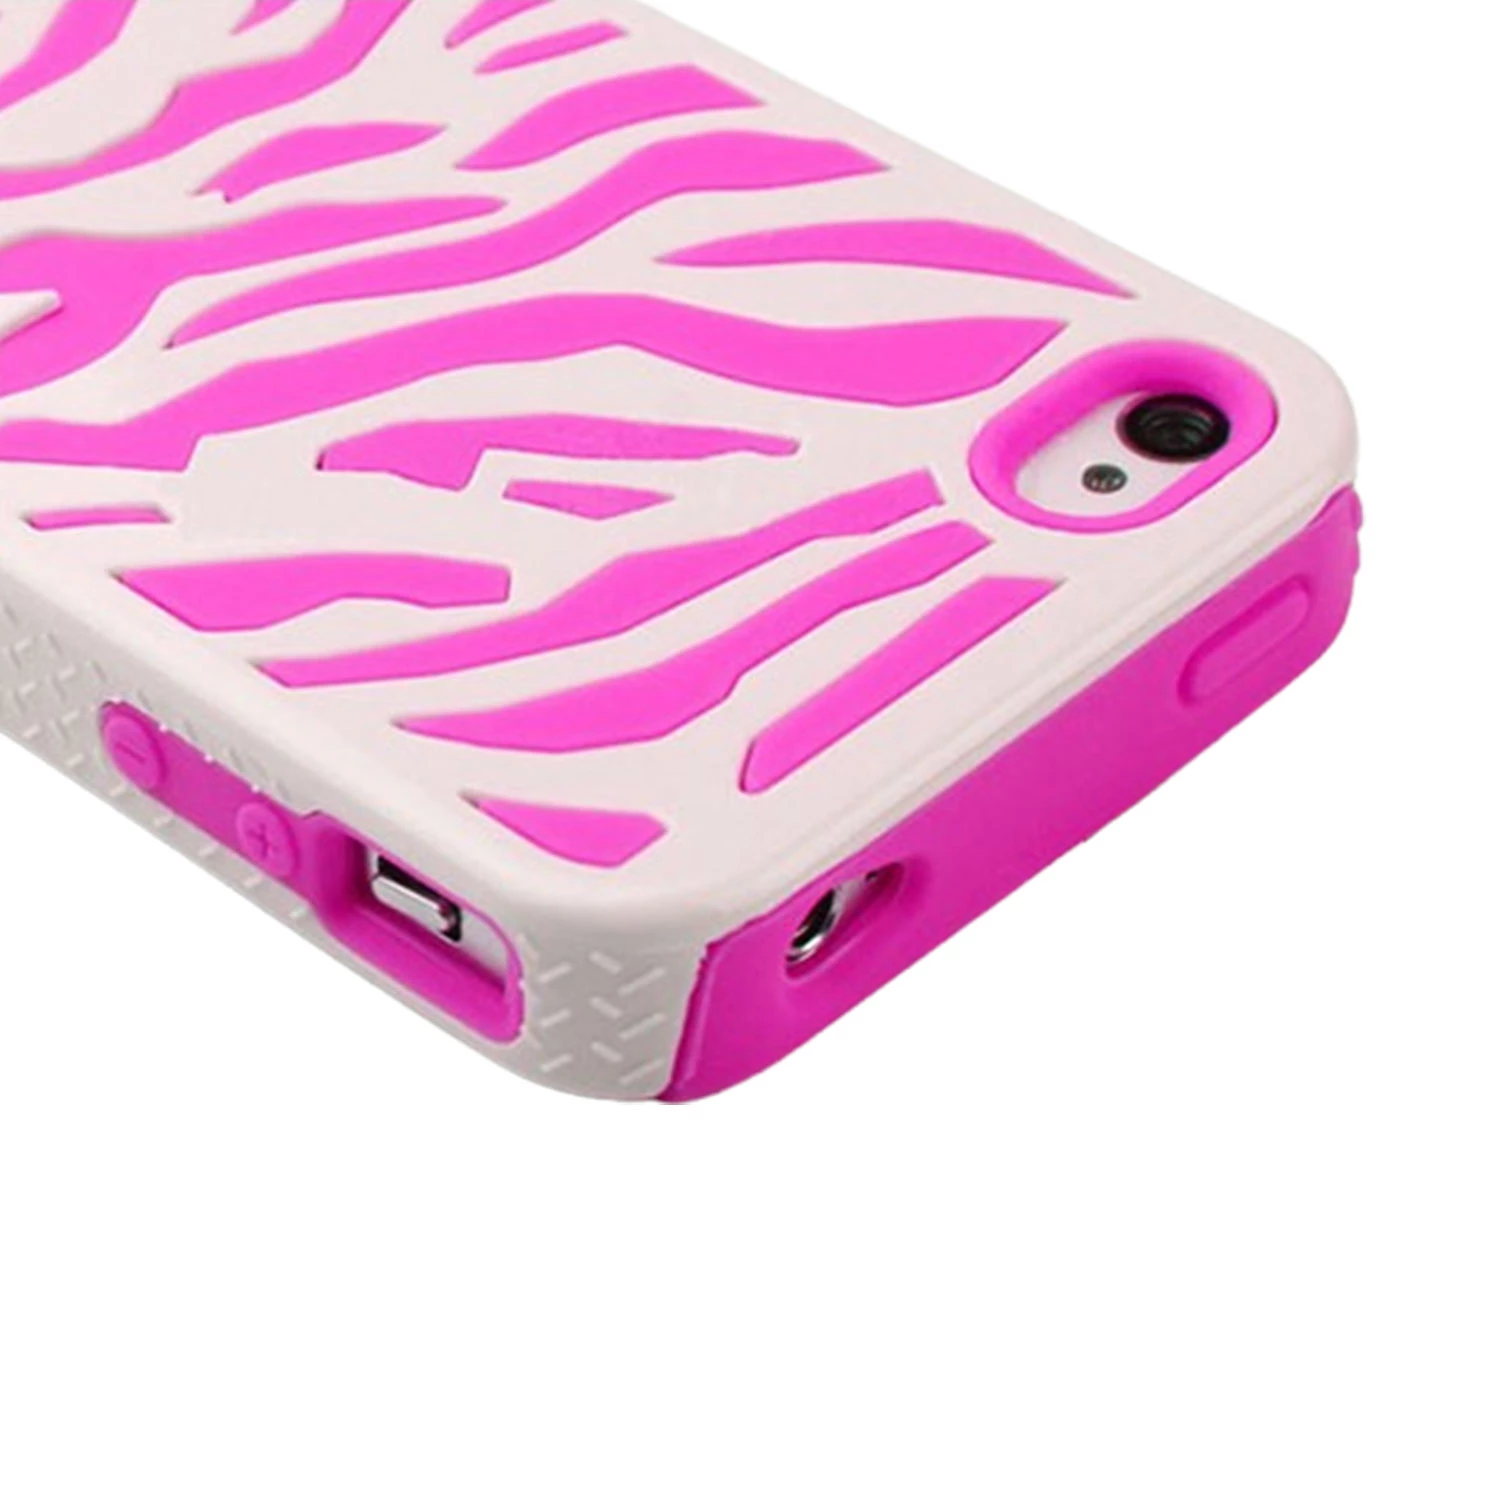 Zebra Combo Hard Soft Case Cover  For iPhone 4 4S Silicone Armor Case